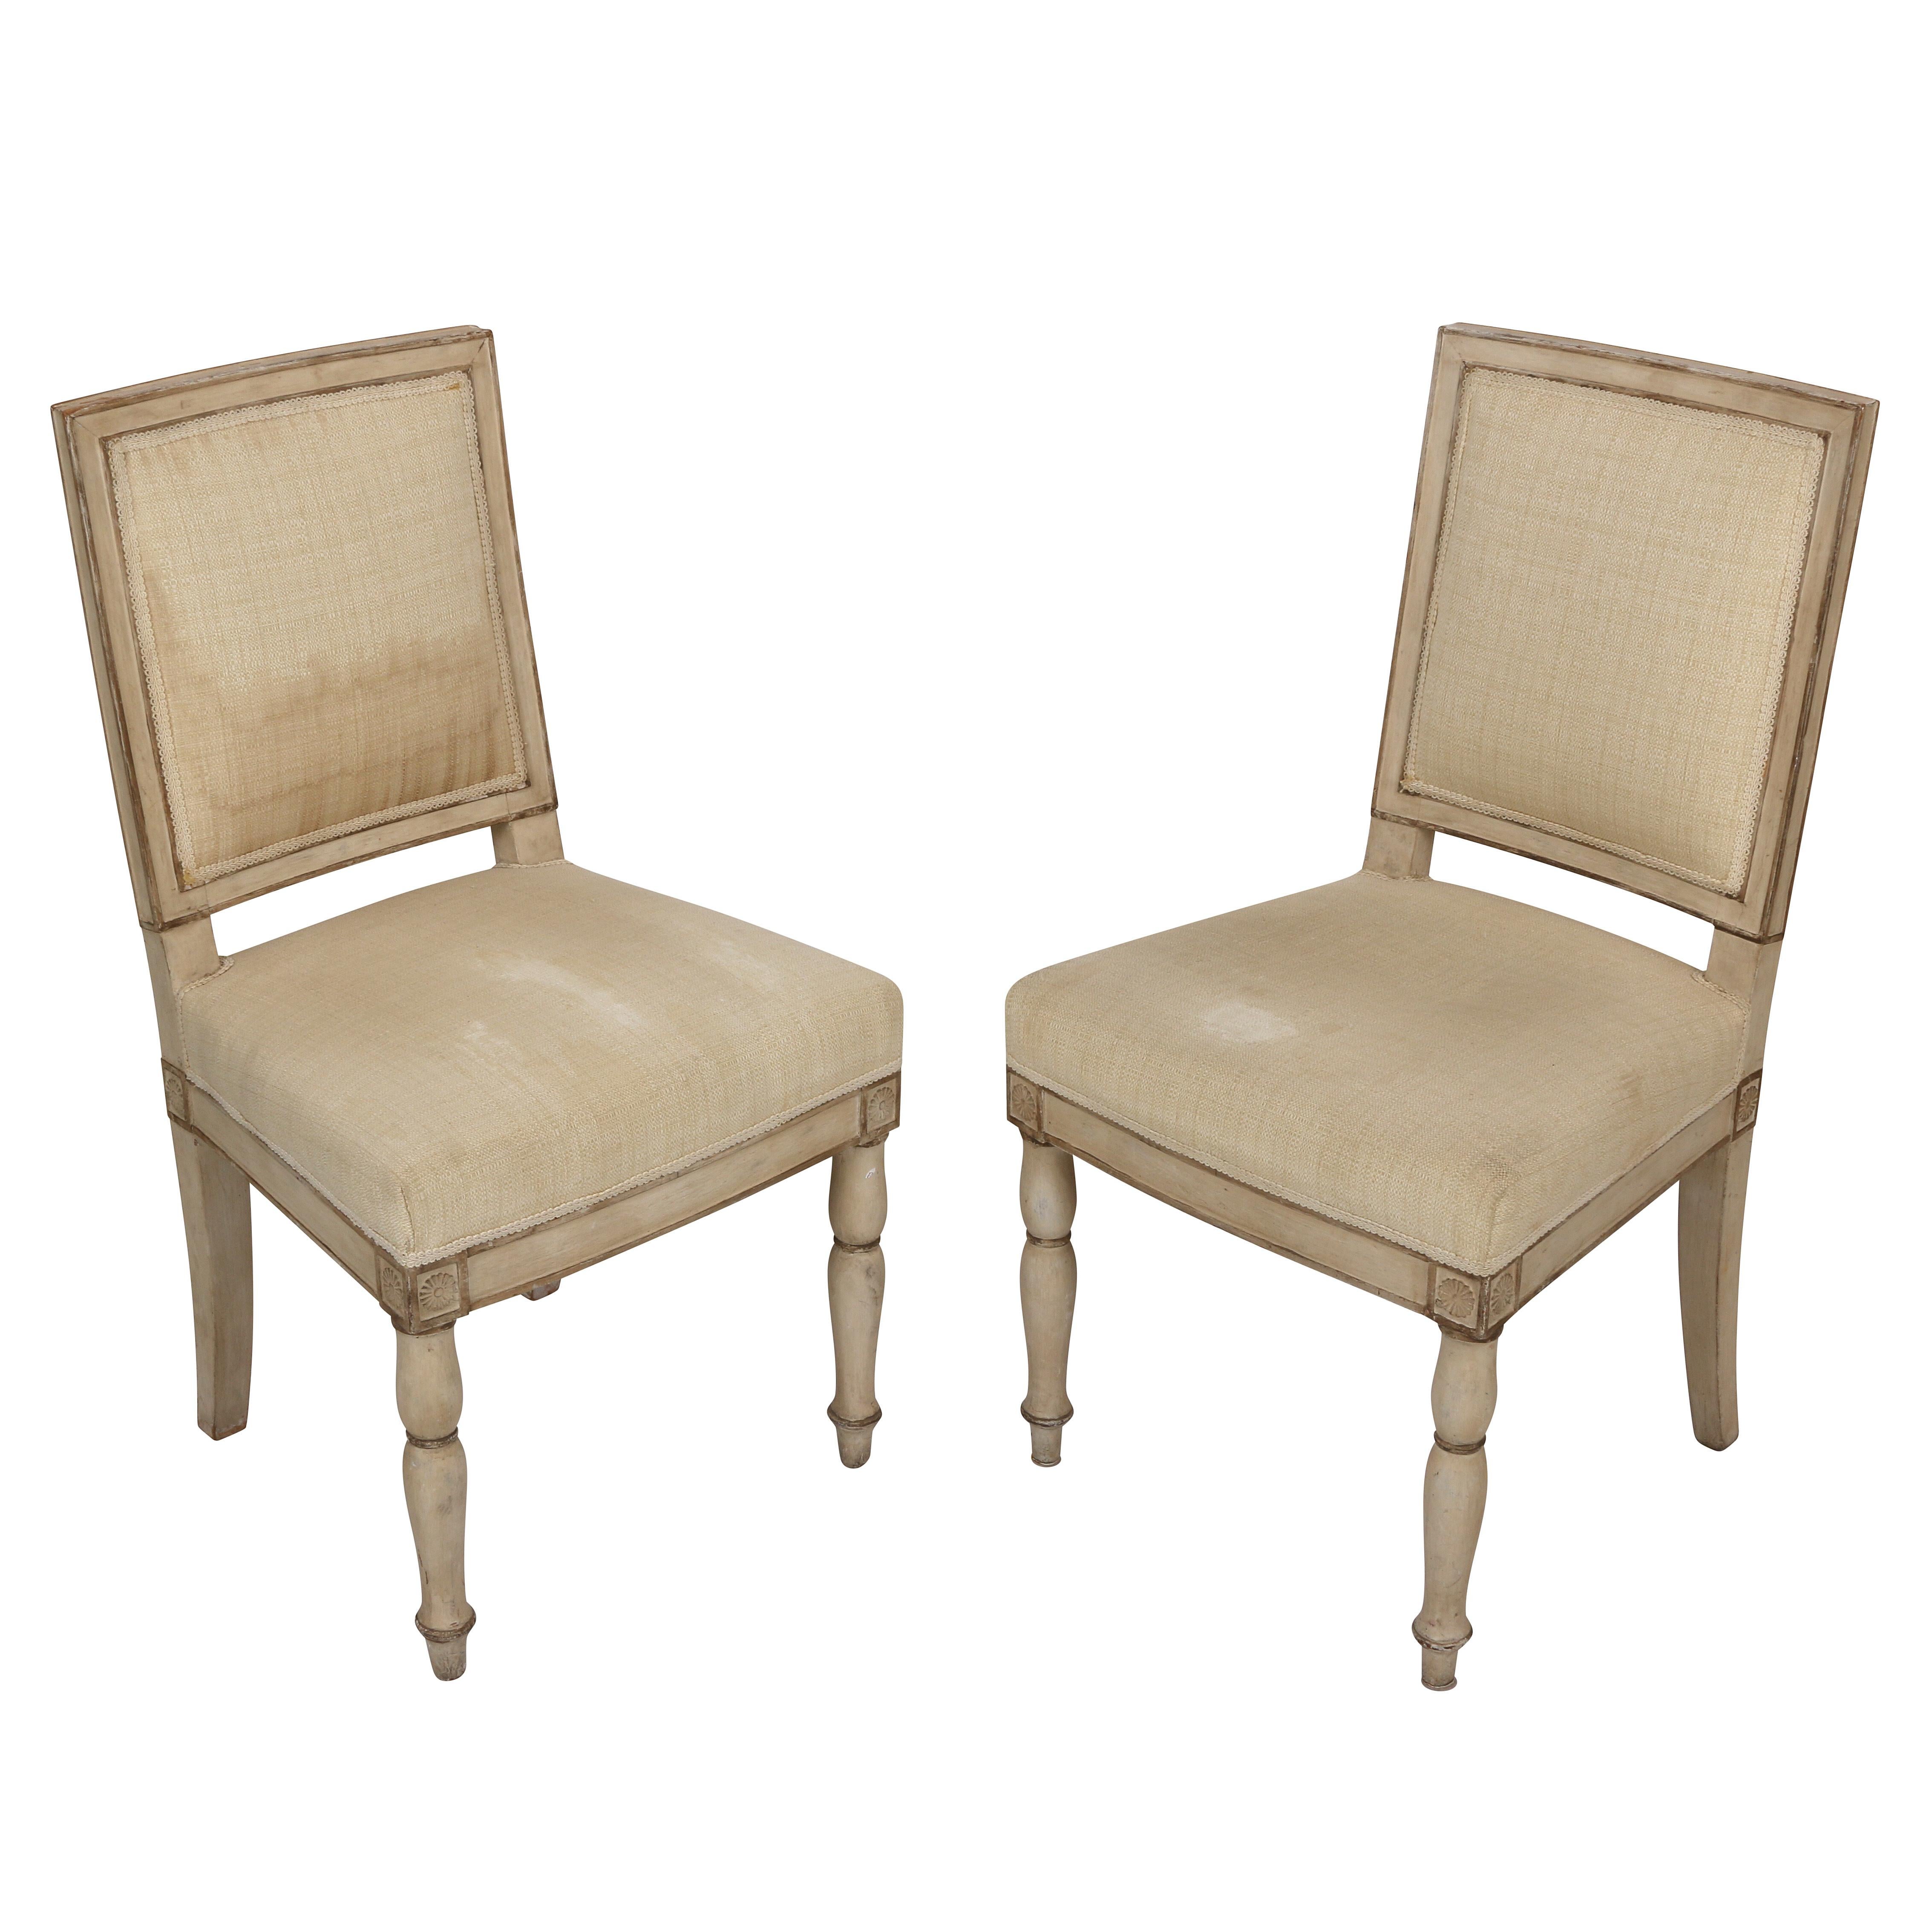 A lovely pair of vintage French wood painted chairs with ivory upholstered seat and back. This super chic pair has a delicate presence and is an adorable addition to either side of a console table or seating area in your home!